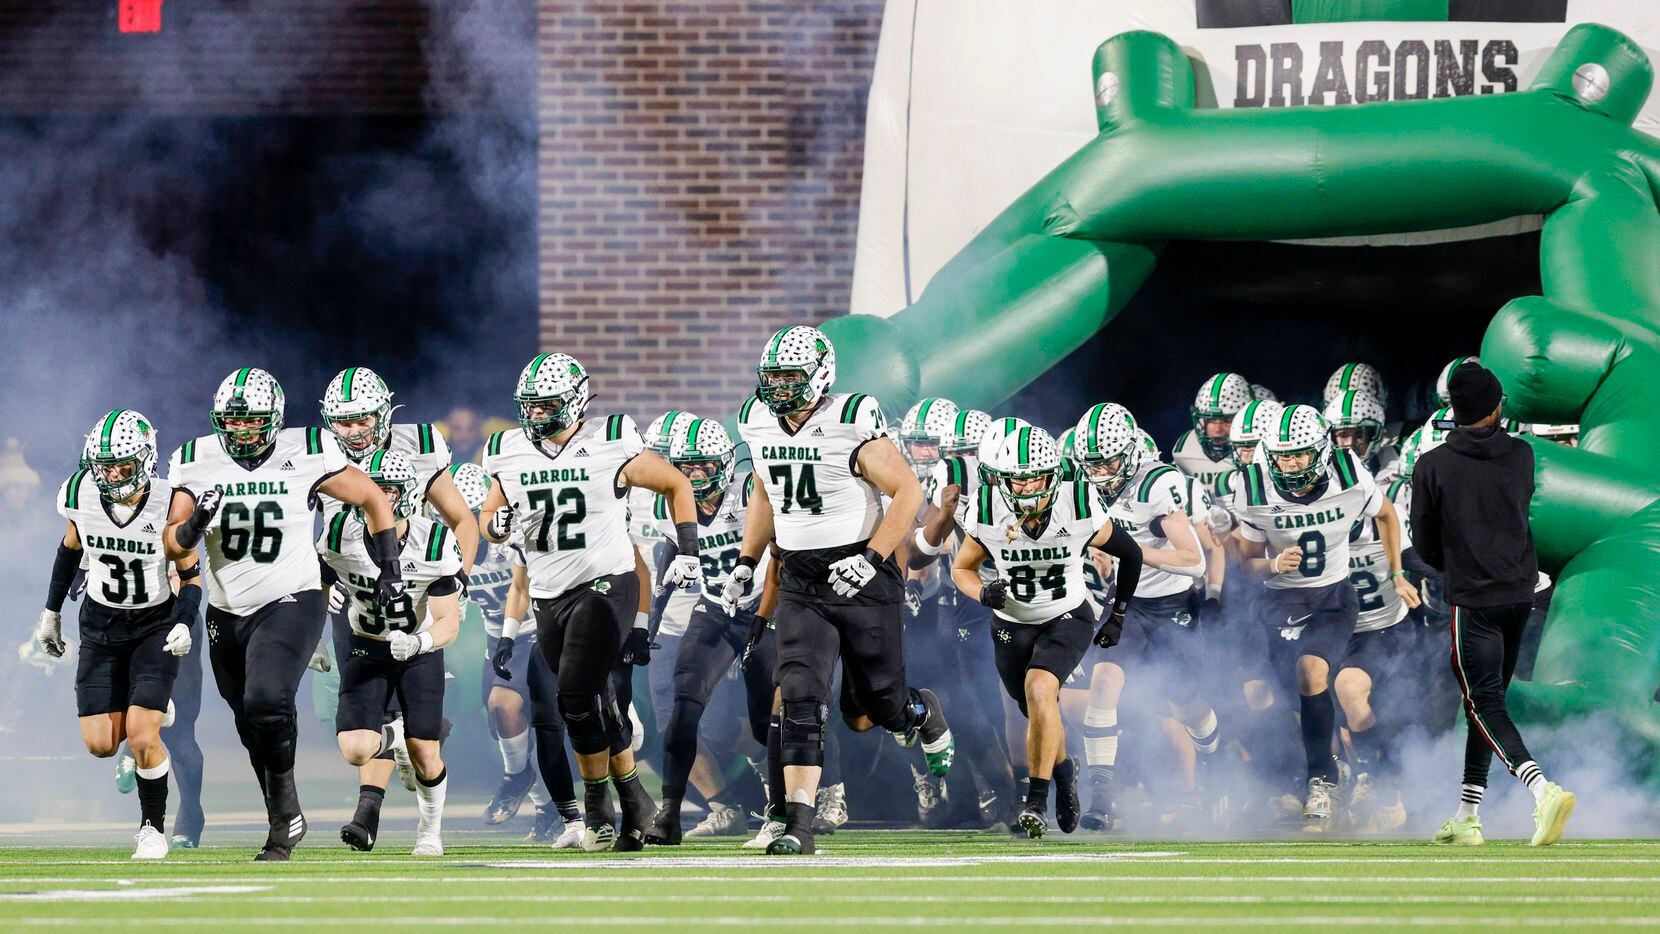 Southlake Carroll takes the field before the second half of their Class 6A Division I state semifinal playoff game at McKinney ISD Stadium in McKinney, Texas, Saturday, Dec. 11, 2021. Duncanville defeated Southlake Carroll 35-9. (Elias Valverde II/The Dallas Morning News)